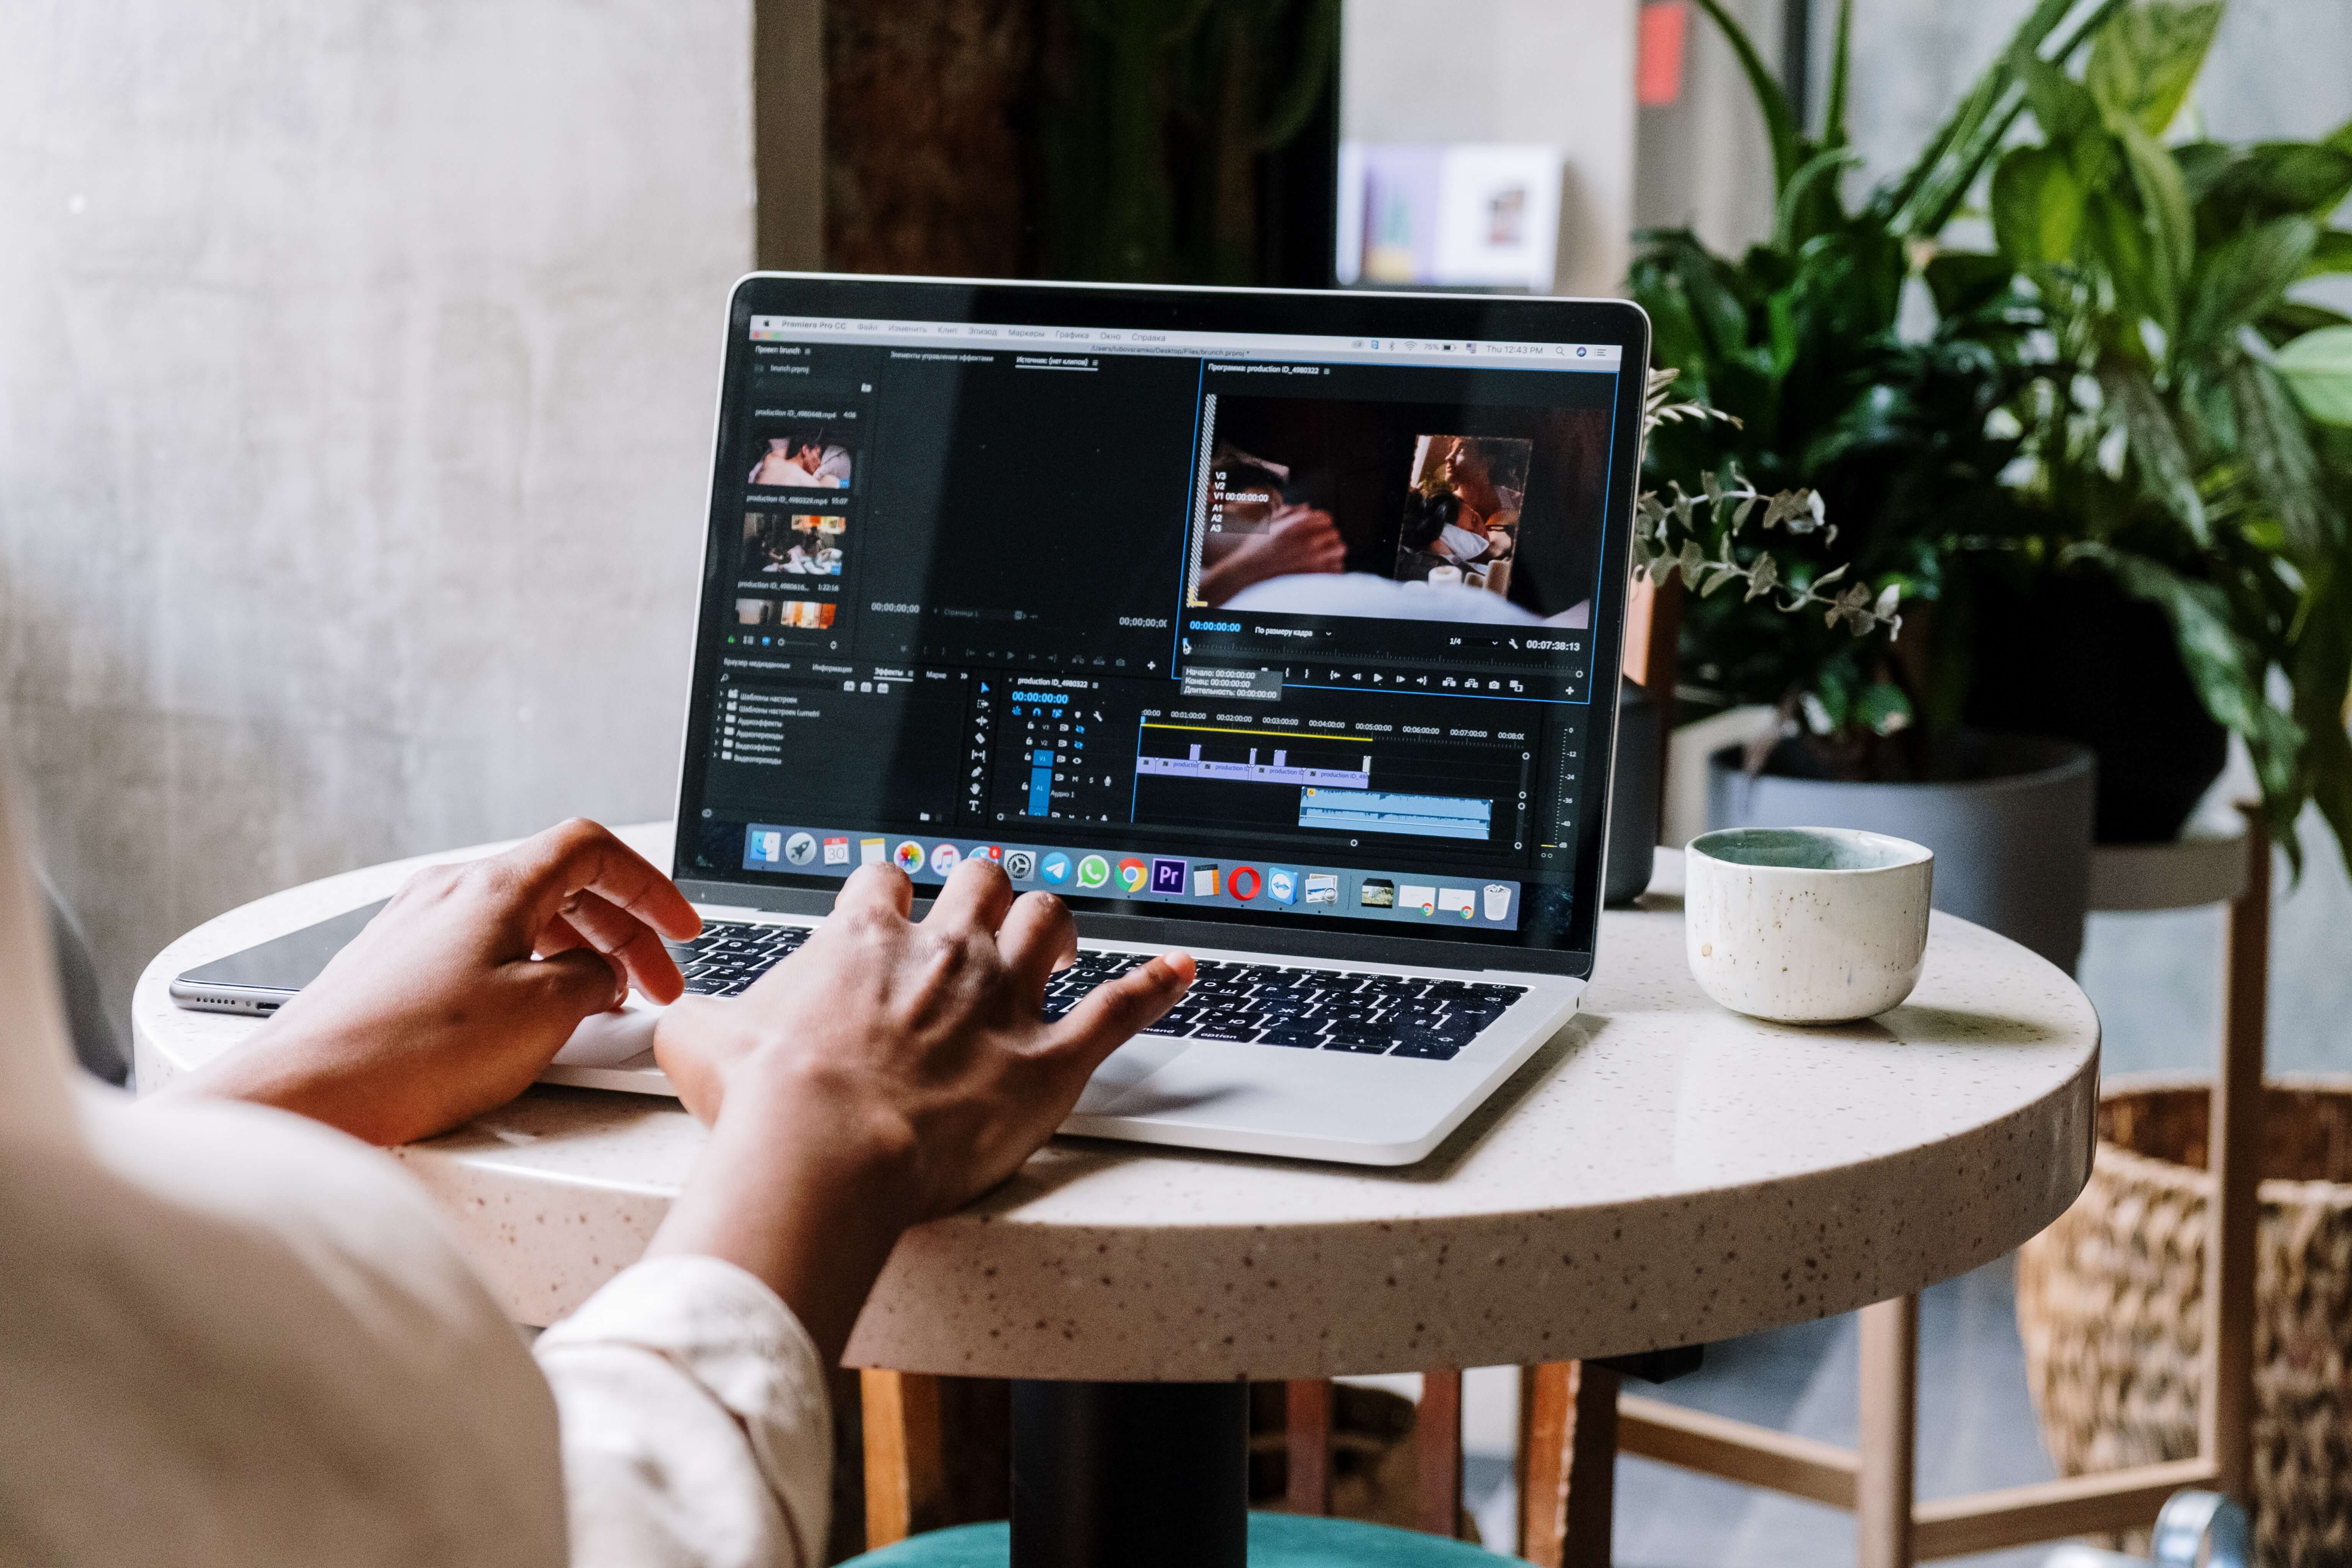 Essential Tips and Tricks for Mastering Adobe Premiere Pro